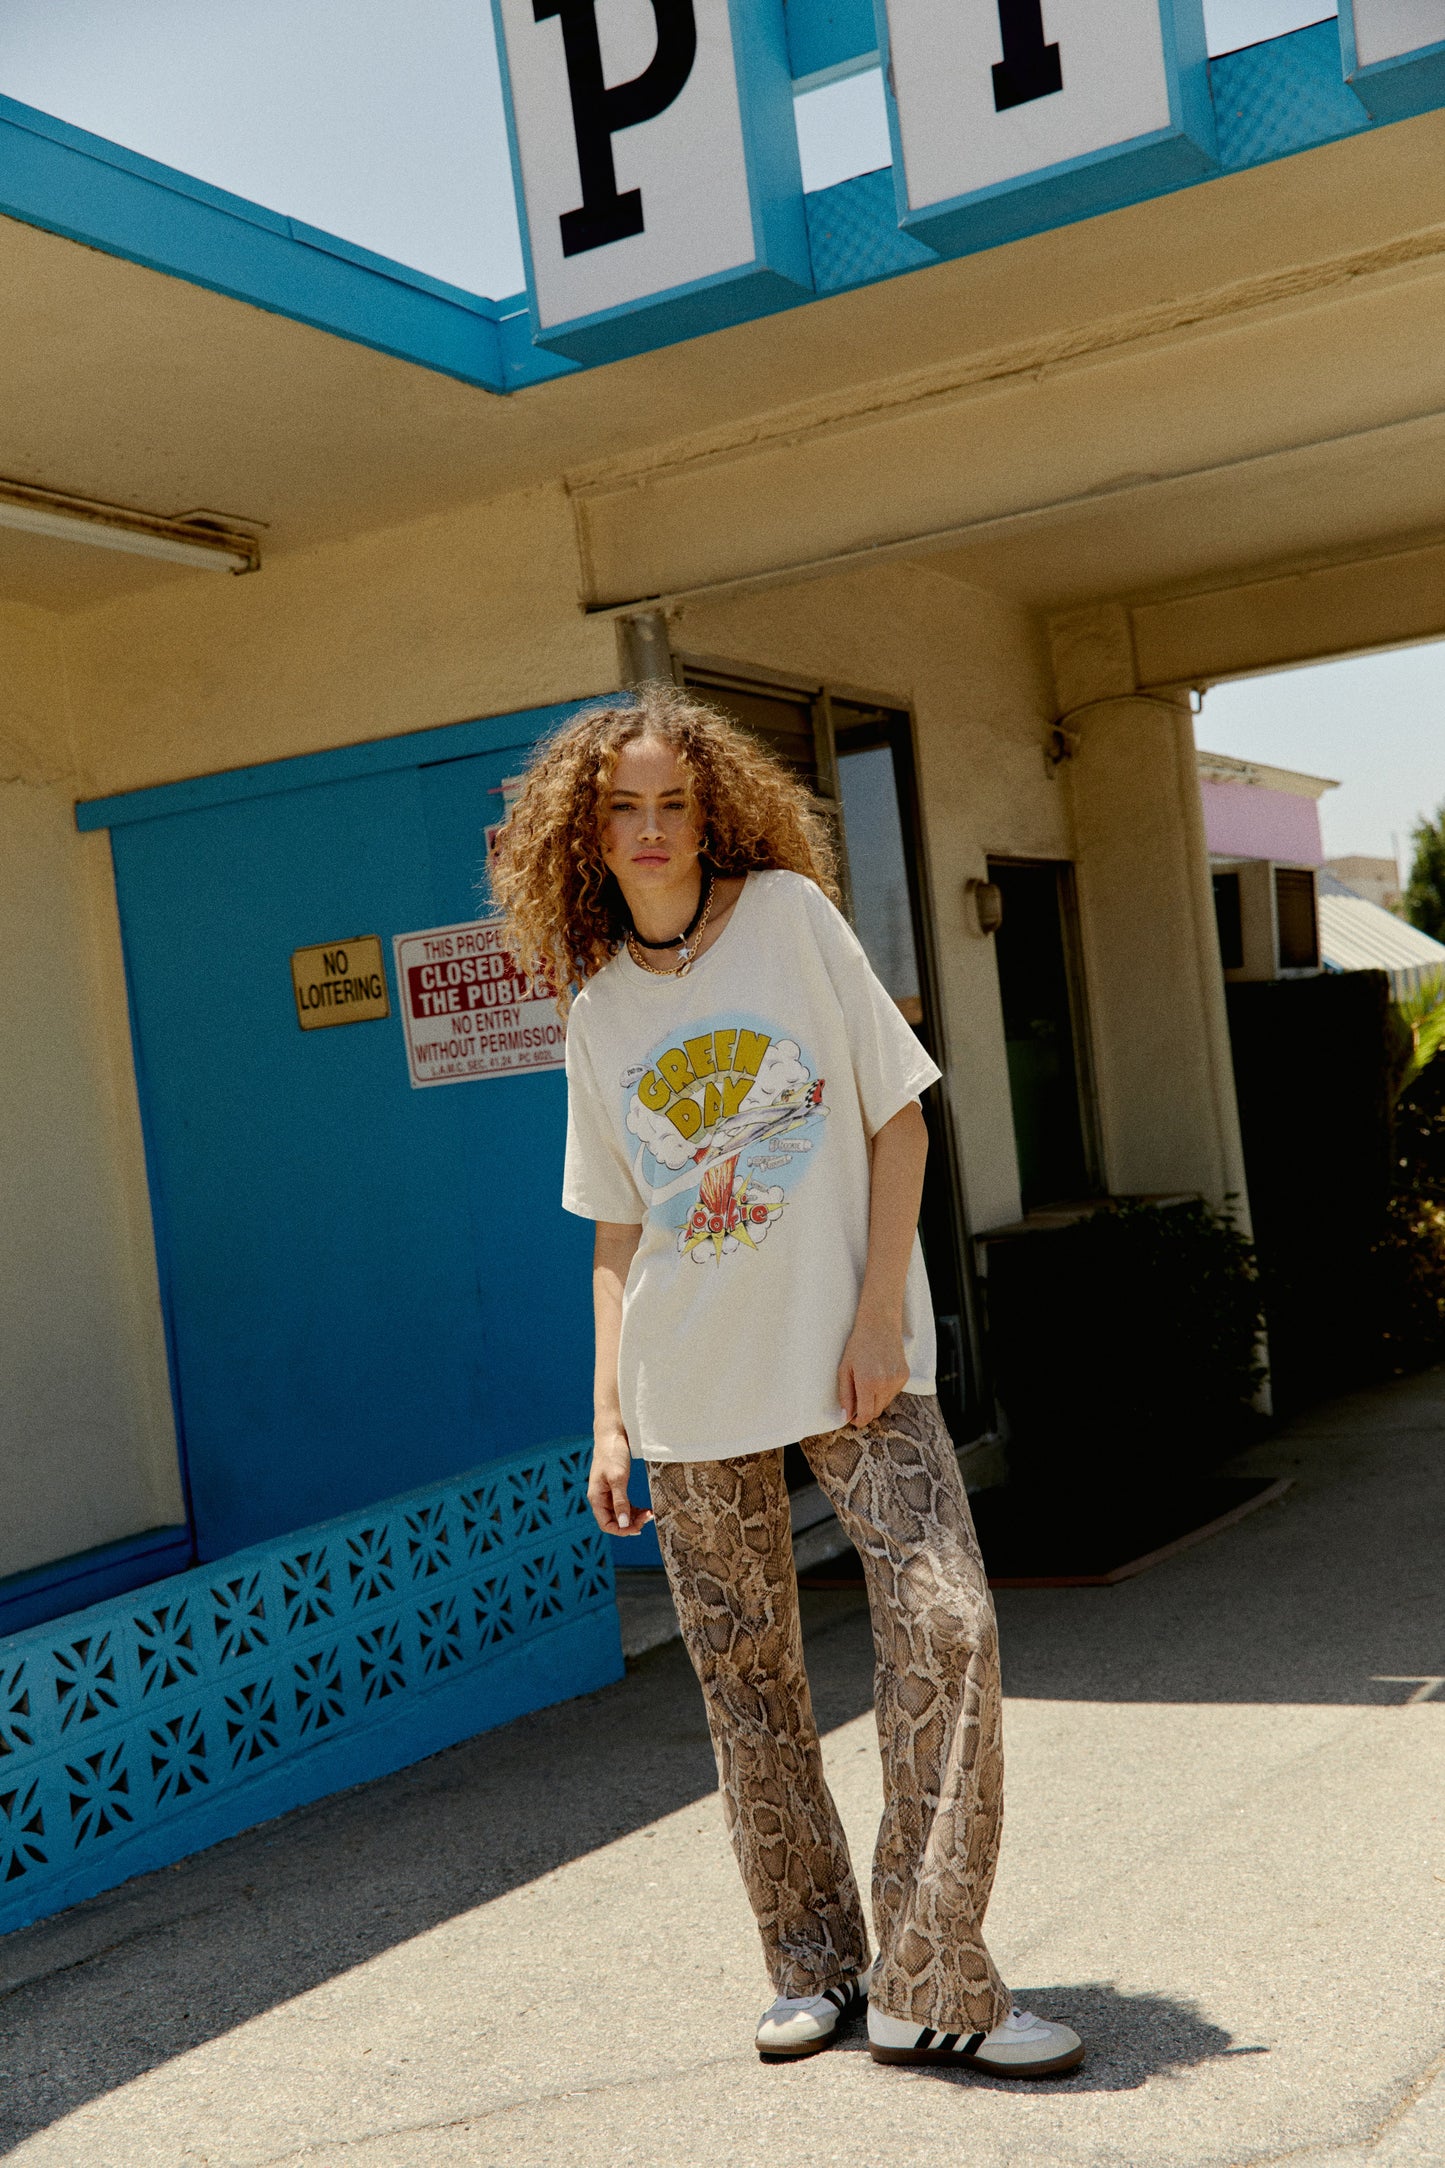 A curly-haired model featuring a white tee designed with the Green Day's album Dookie cover.